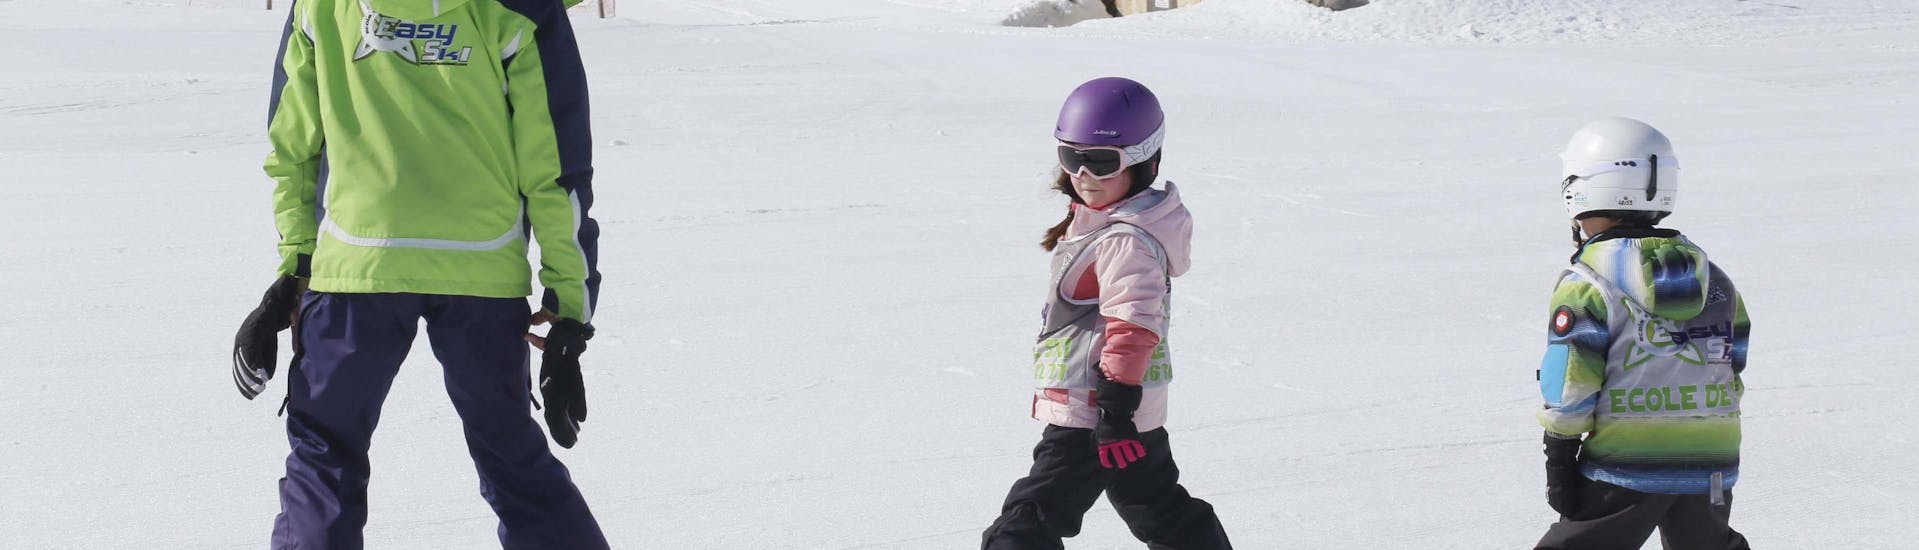 Kids are following Private Ski Lessons for Kids of All Ages - Holidays with our partner EasySki Alpe d’Huez.